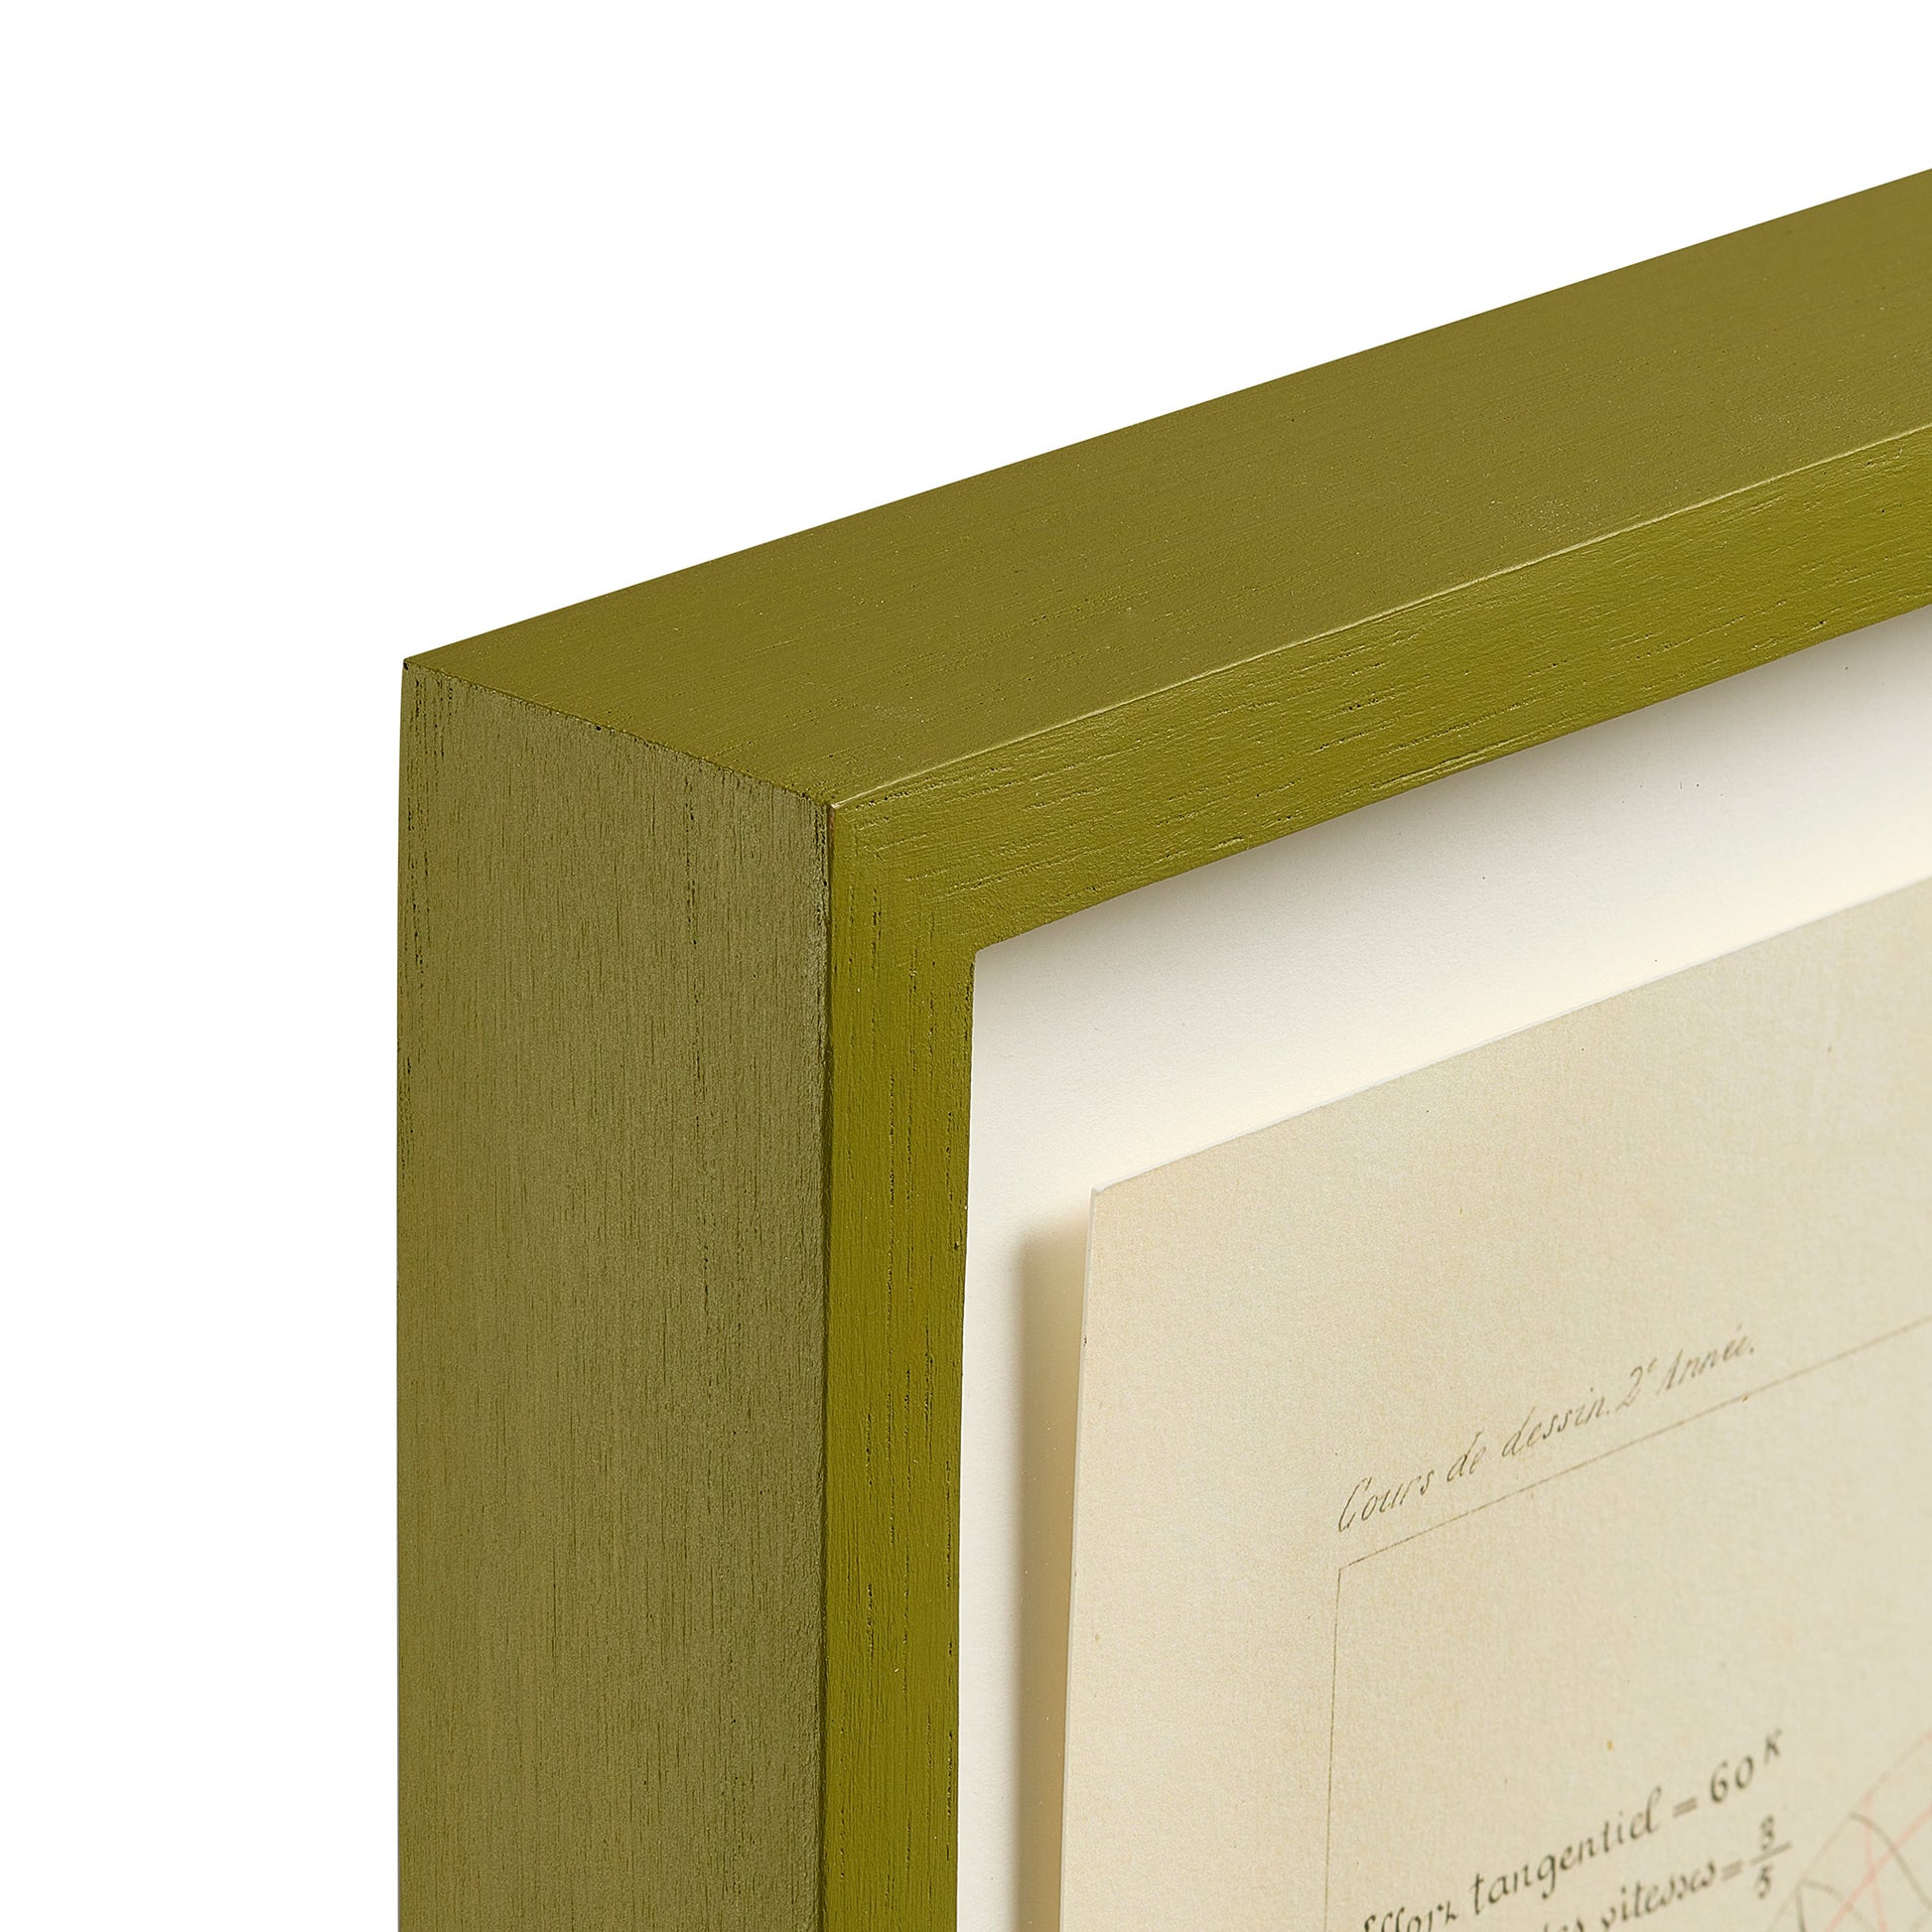 Print by G. Barraud of a technical drawing, float-mounted and framed in hand-painted olive green. Corner detail.